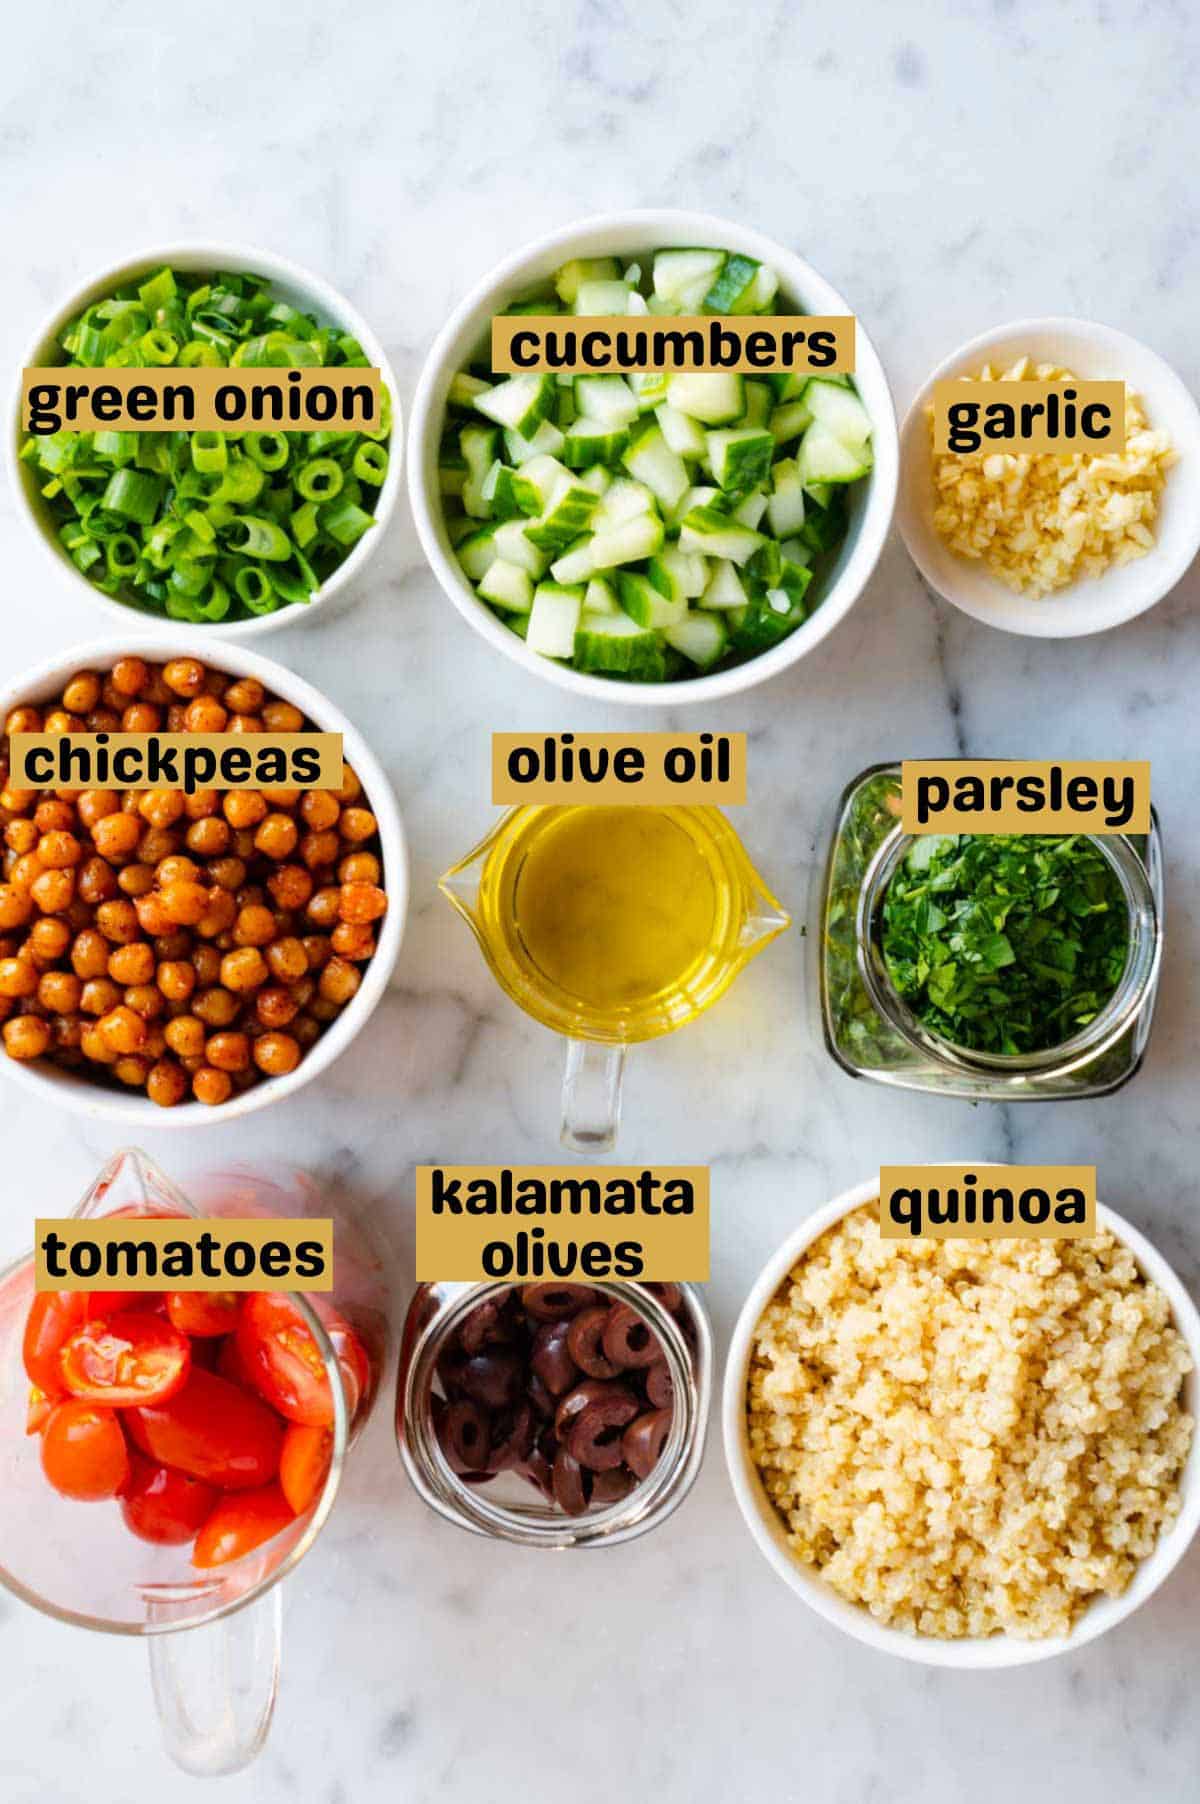 Chopped green onion, cucumber, garlic, parsley, mint, grape tomatoes, and olives in jars with a bowl or quinoa, roasted chickpeas, and olive oil.